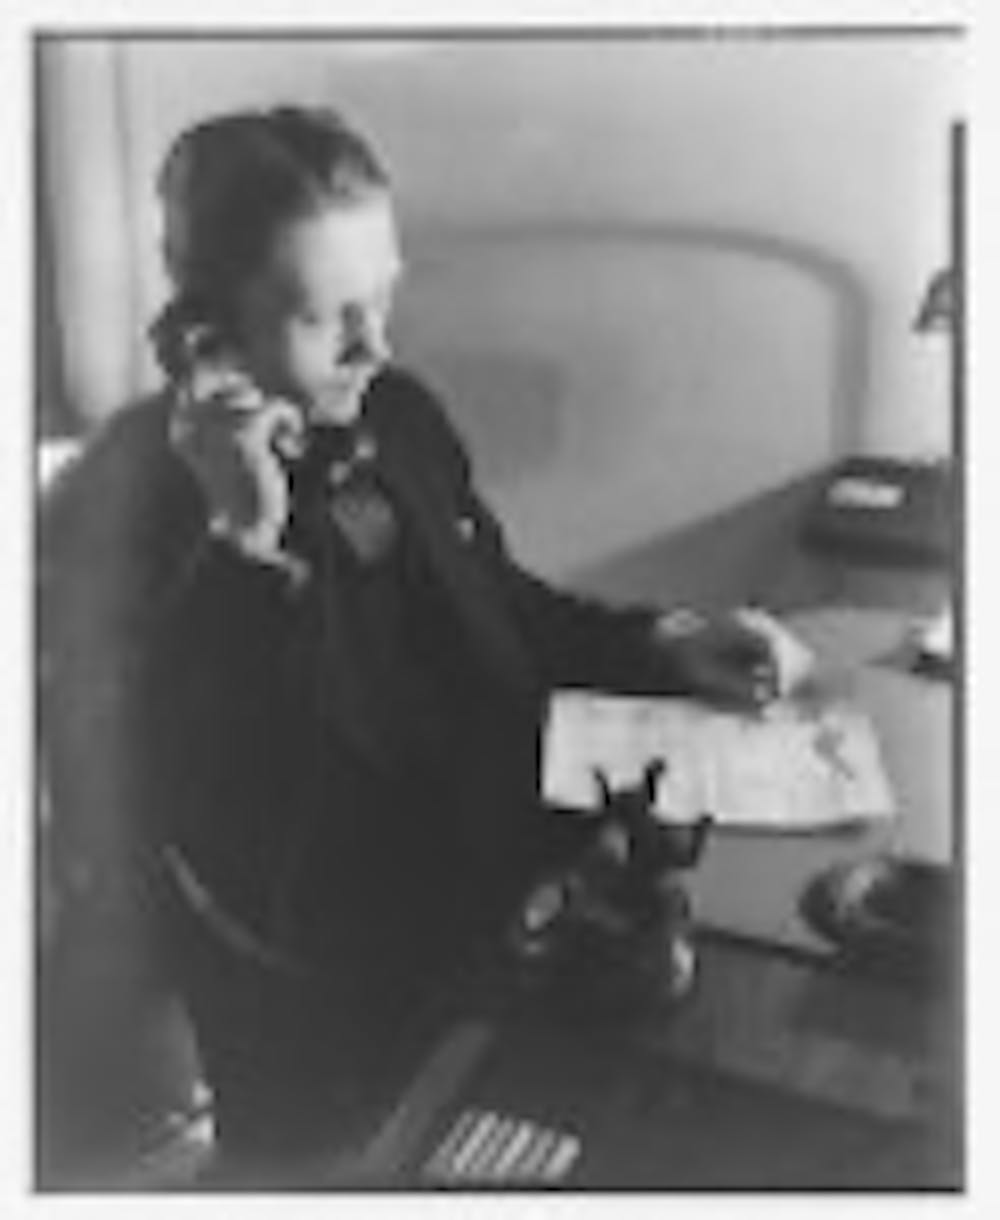 A black and white photograph of a man on an early telephone